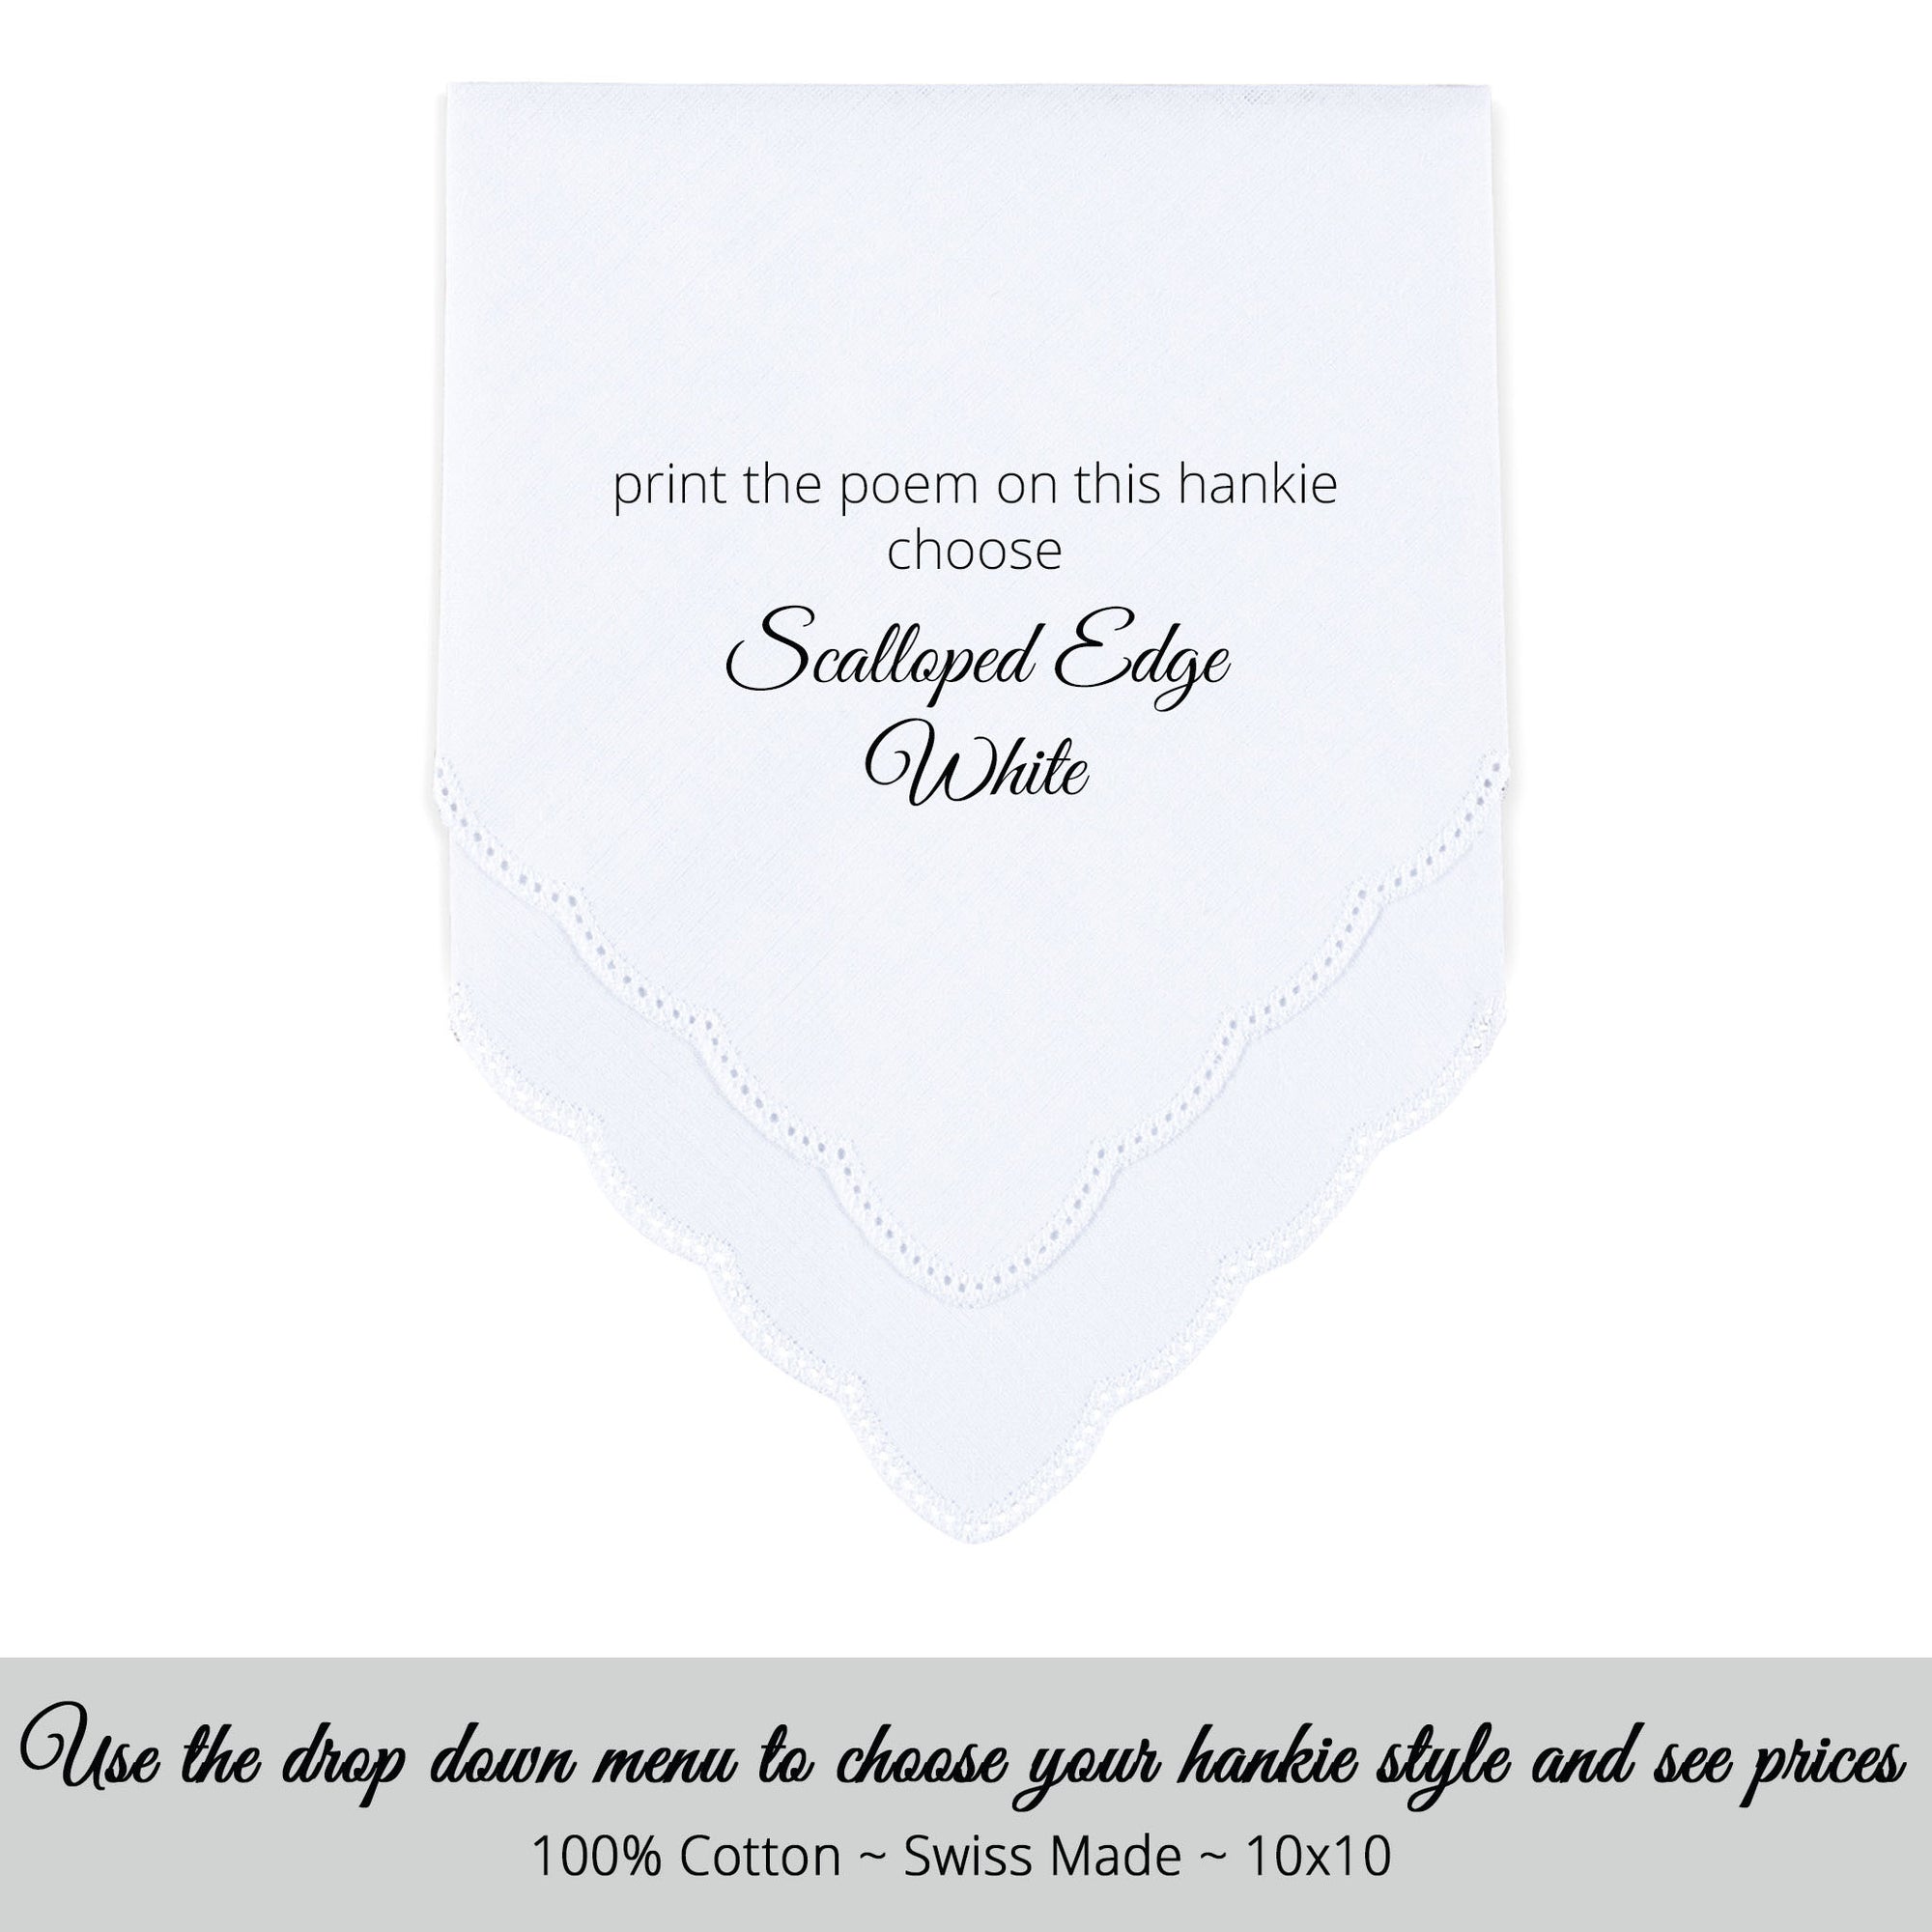 Scalloped edge white personalized wedding handkerchief for the parents of the bride